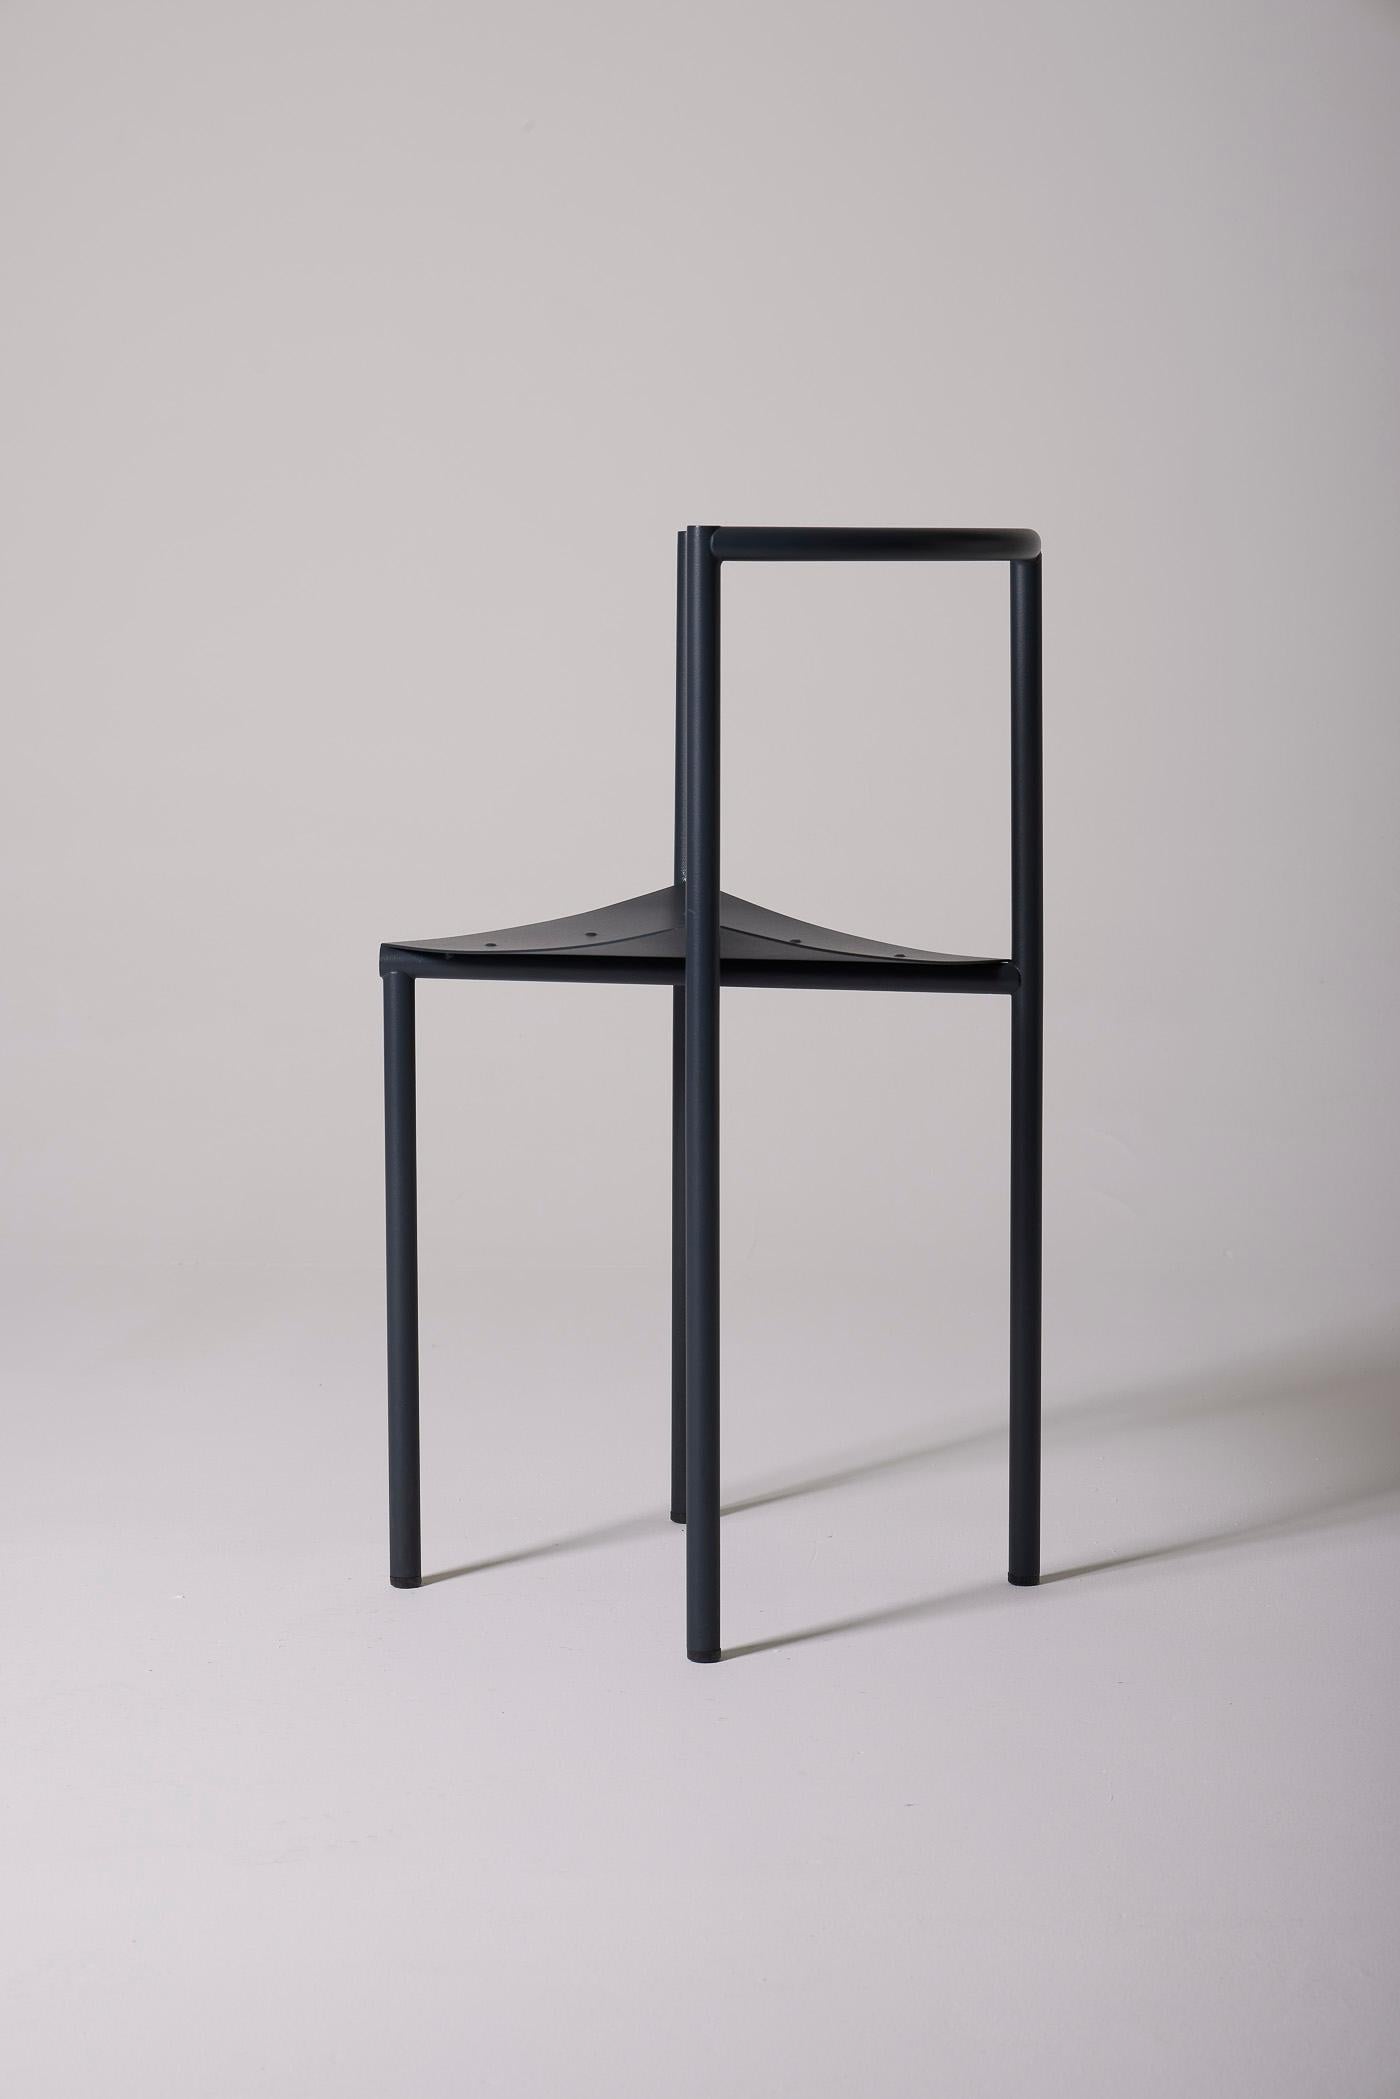 French Philippe Starck chair